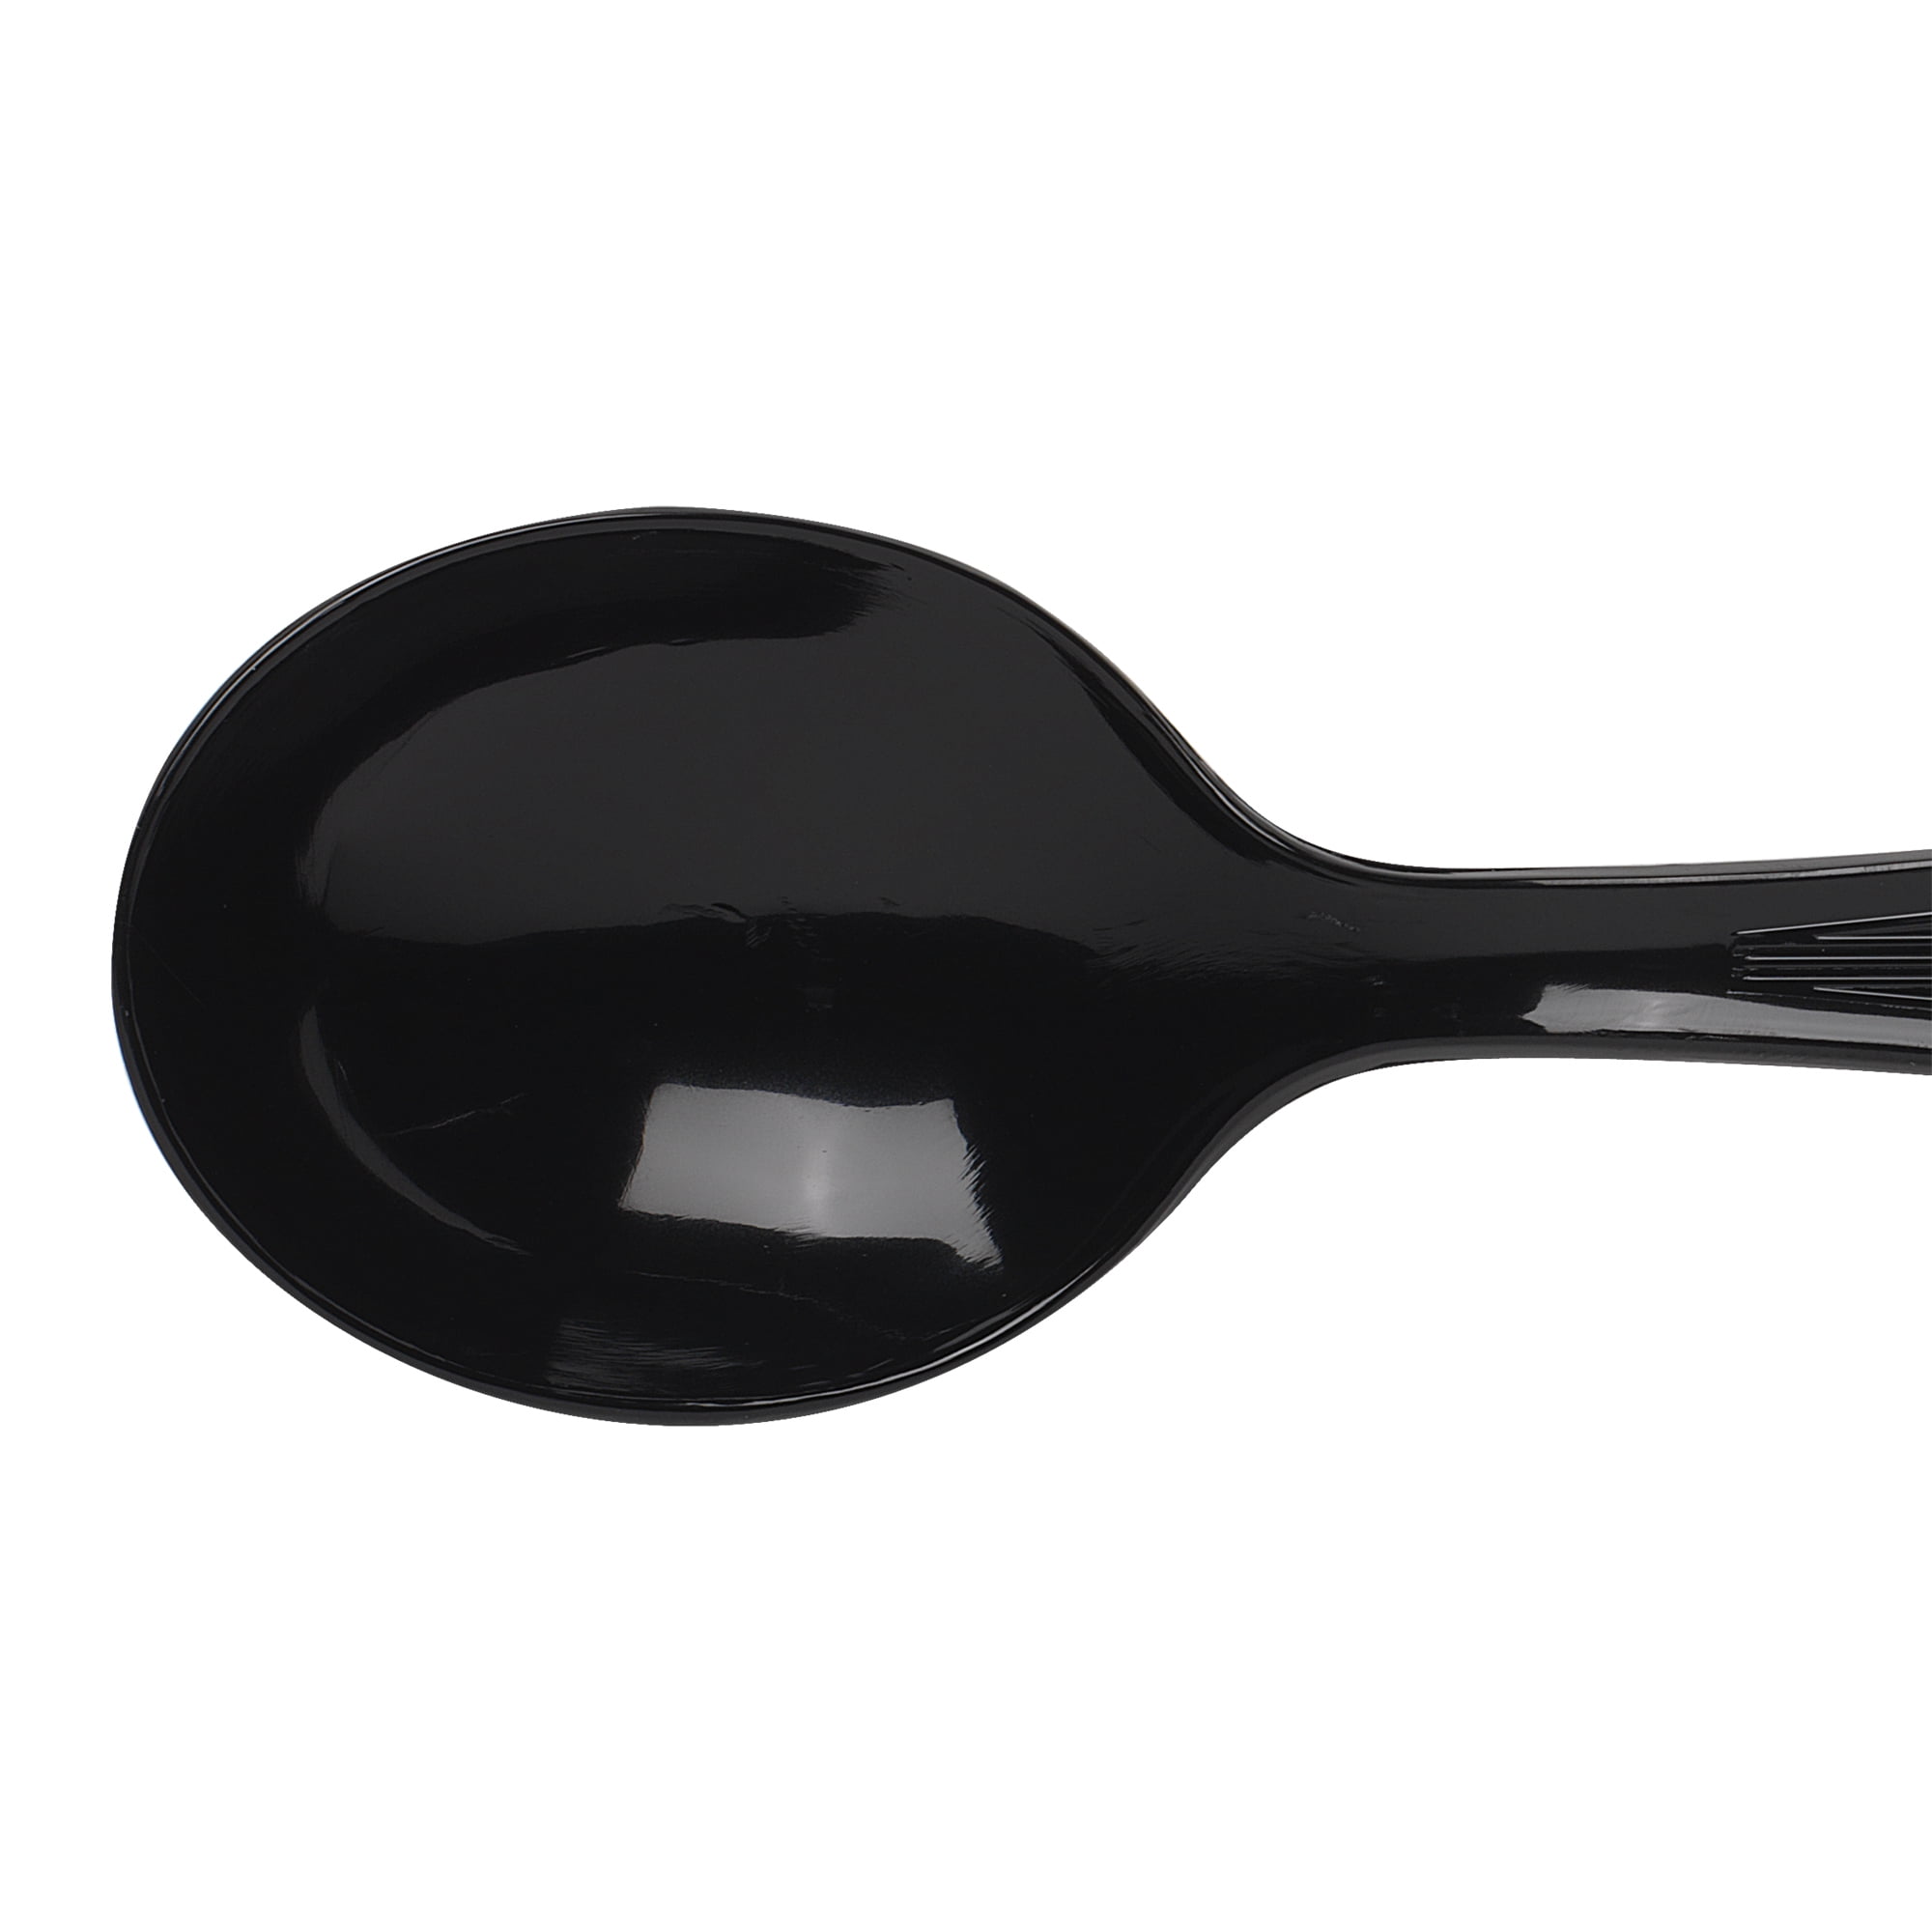 KitchInventions 1002 Spoon Buddy, Black - 11 x 8.5 x 2 in., 1 - Kroger